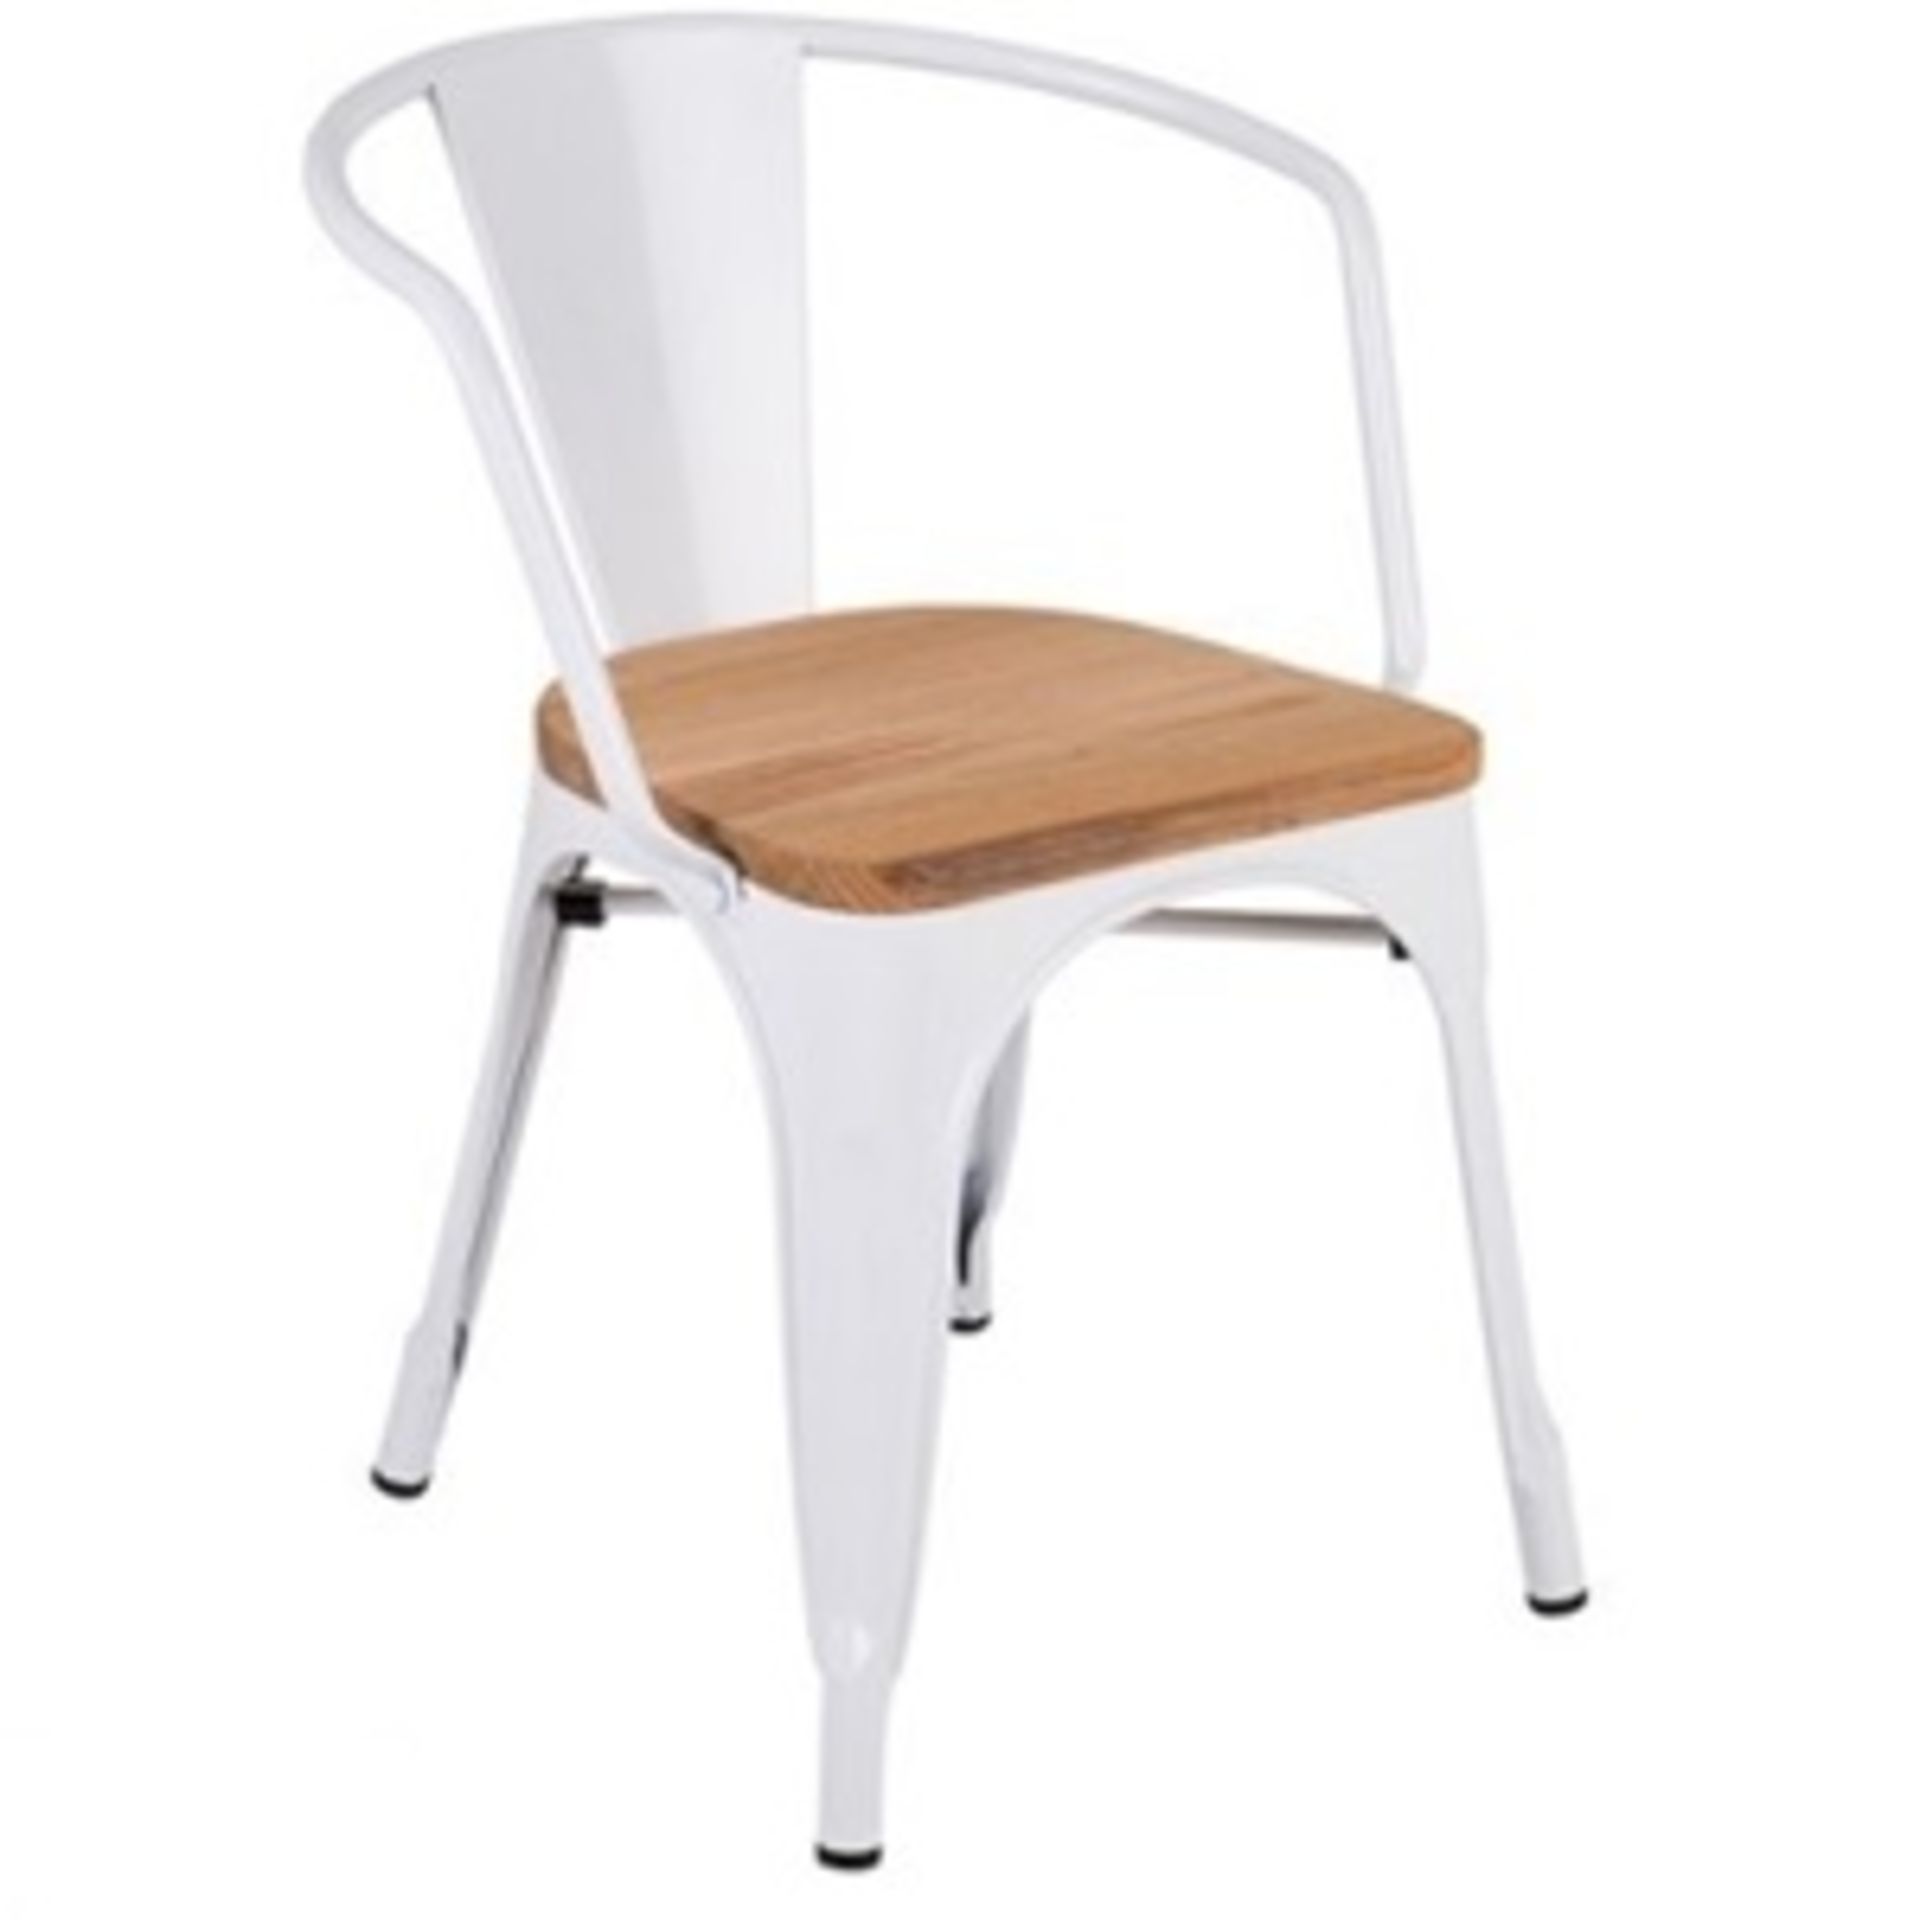 4 x Industrial Tolix Style Stackable Chairs With Armrests and Wooden Seats - Finish: WHITE/PINE -